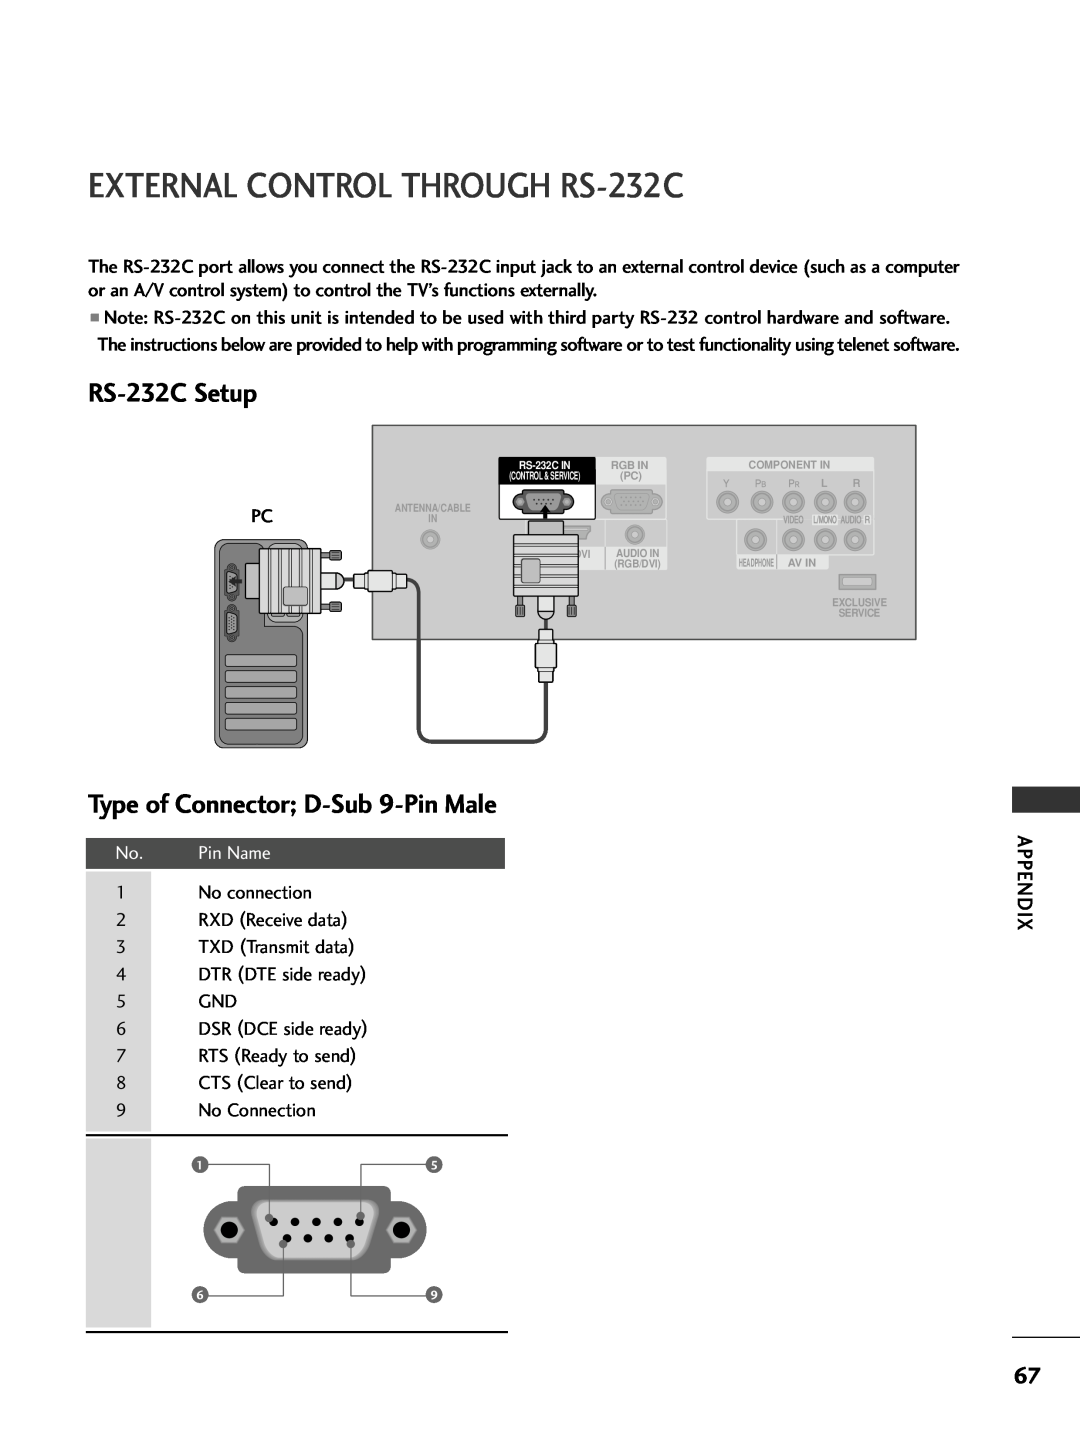 LG Electronics 32PC5DVC EXTERNAL CONTROL THROUGH RS-232C, RS-232C Setup, Type of Connector D-Sub 9-Pin Male, Pin Name 